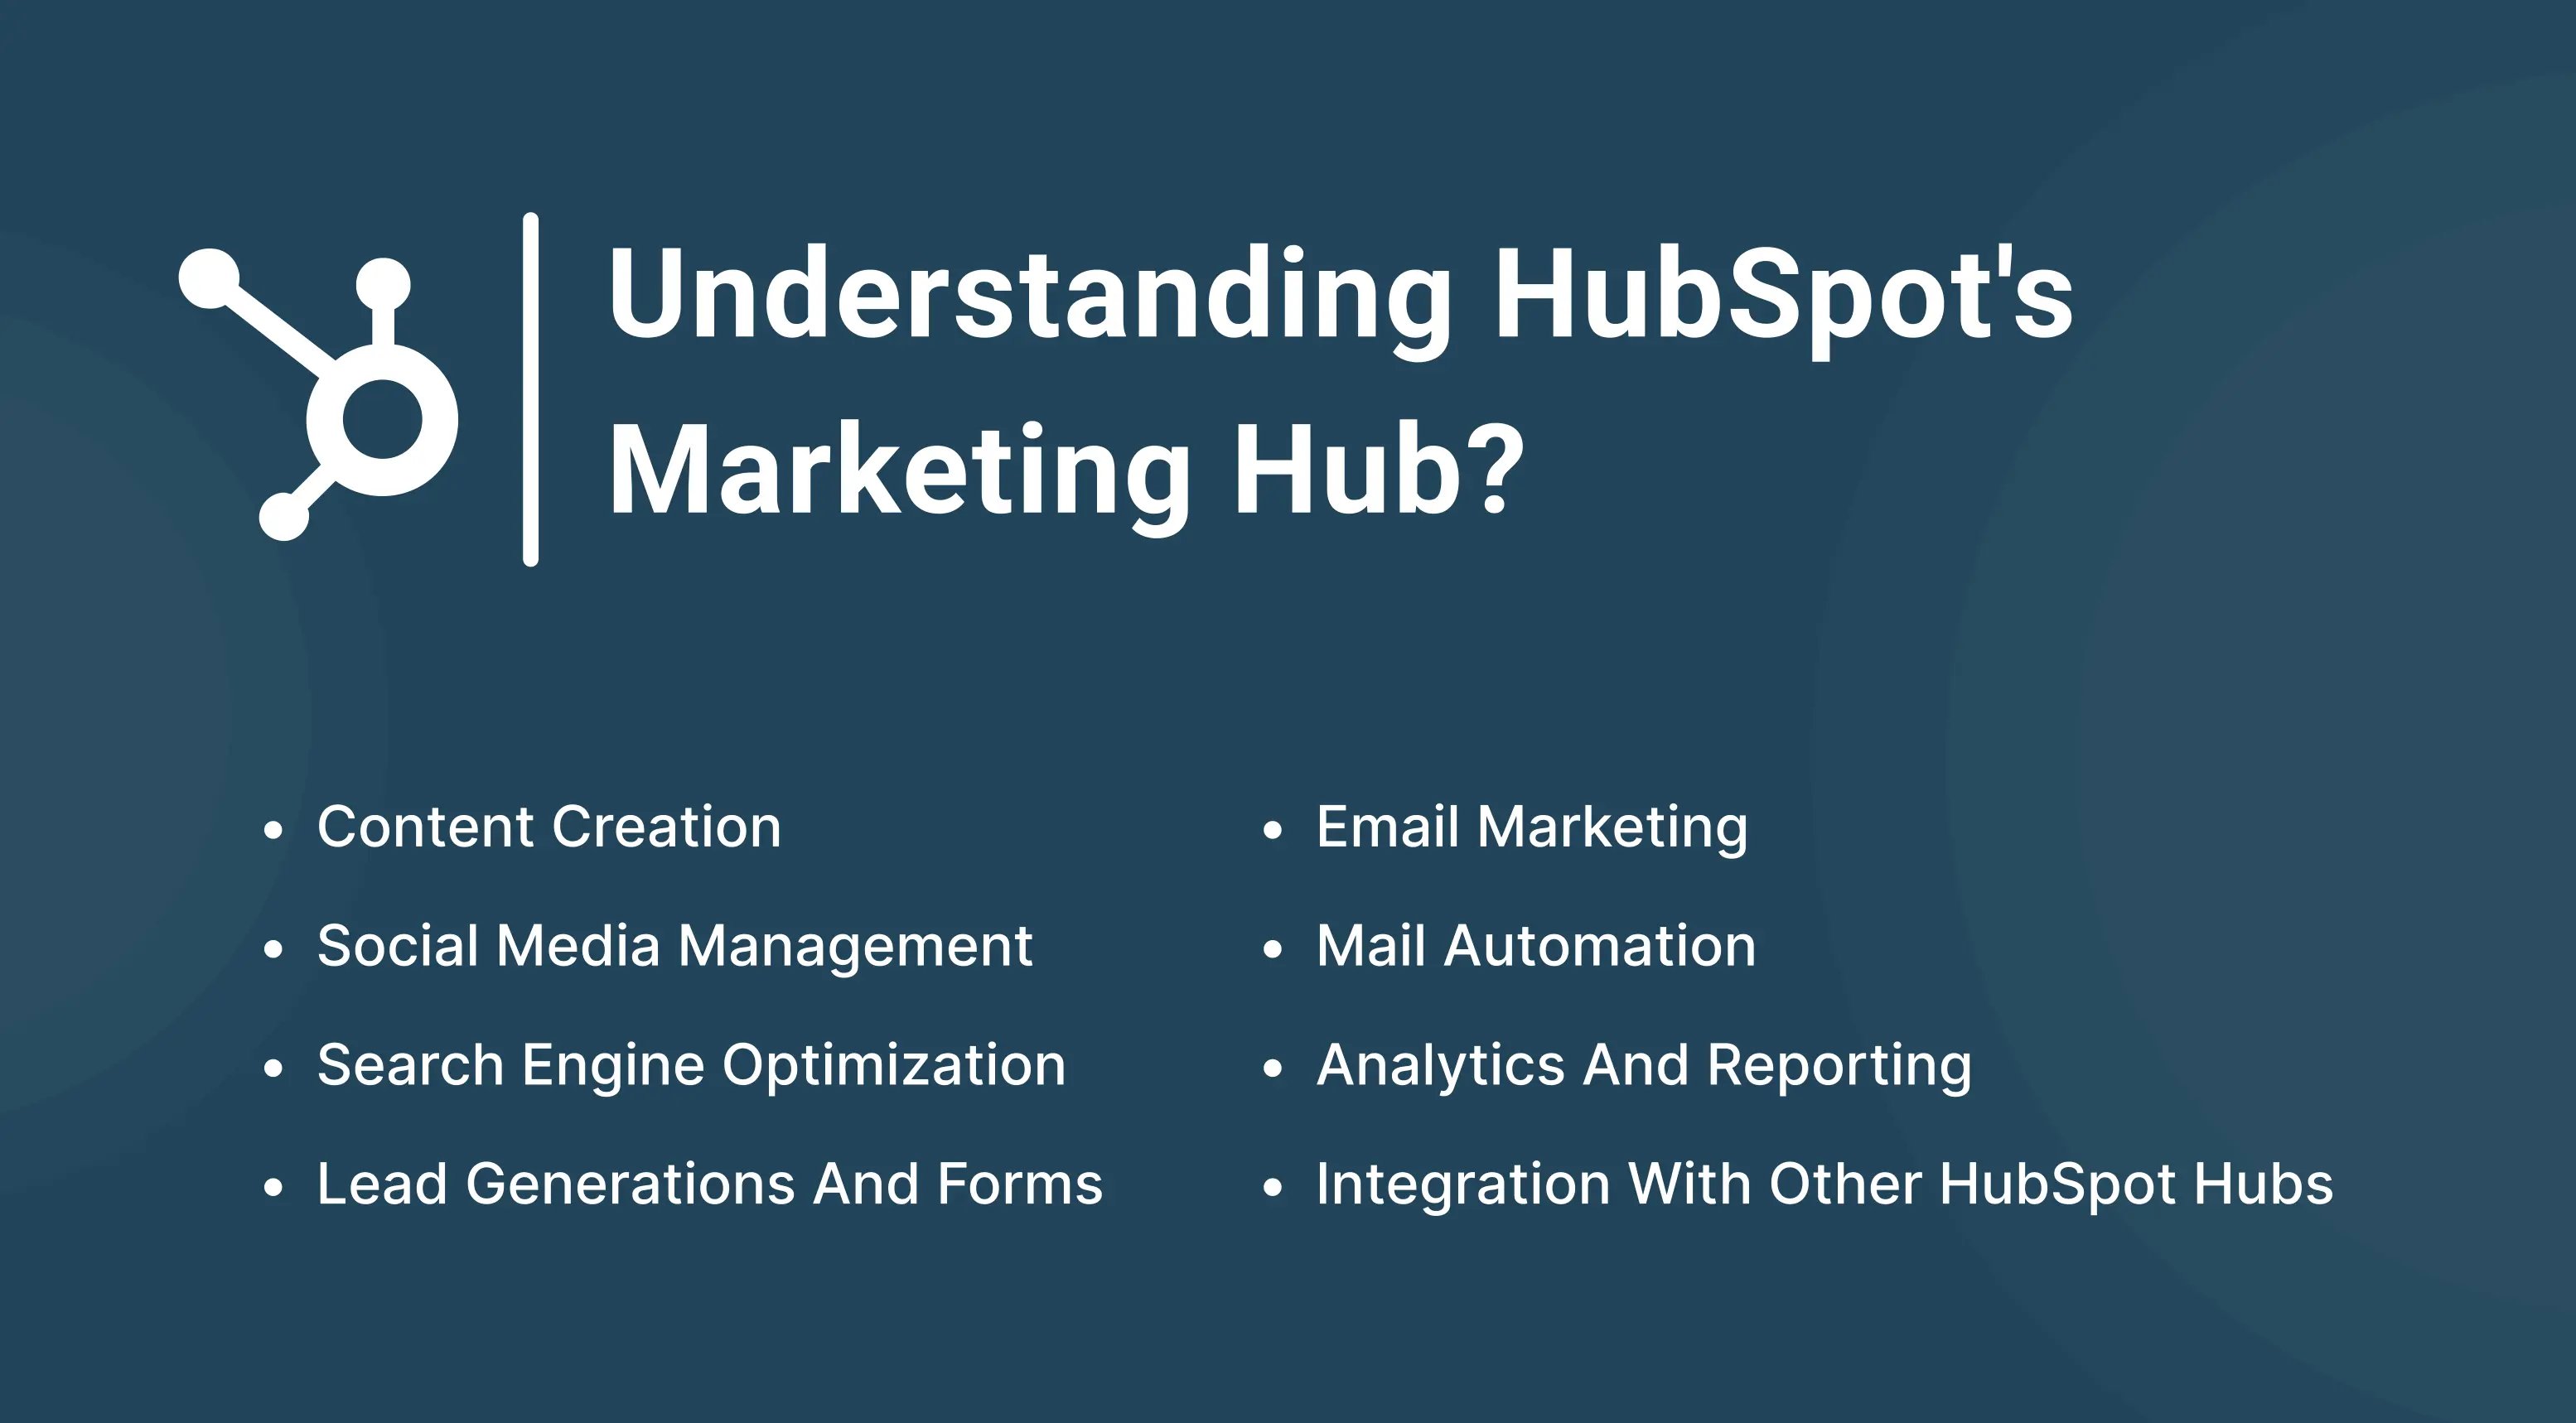 2-Marketing Hub pack features (1)